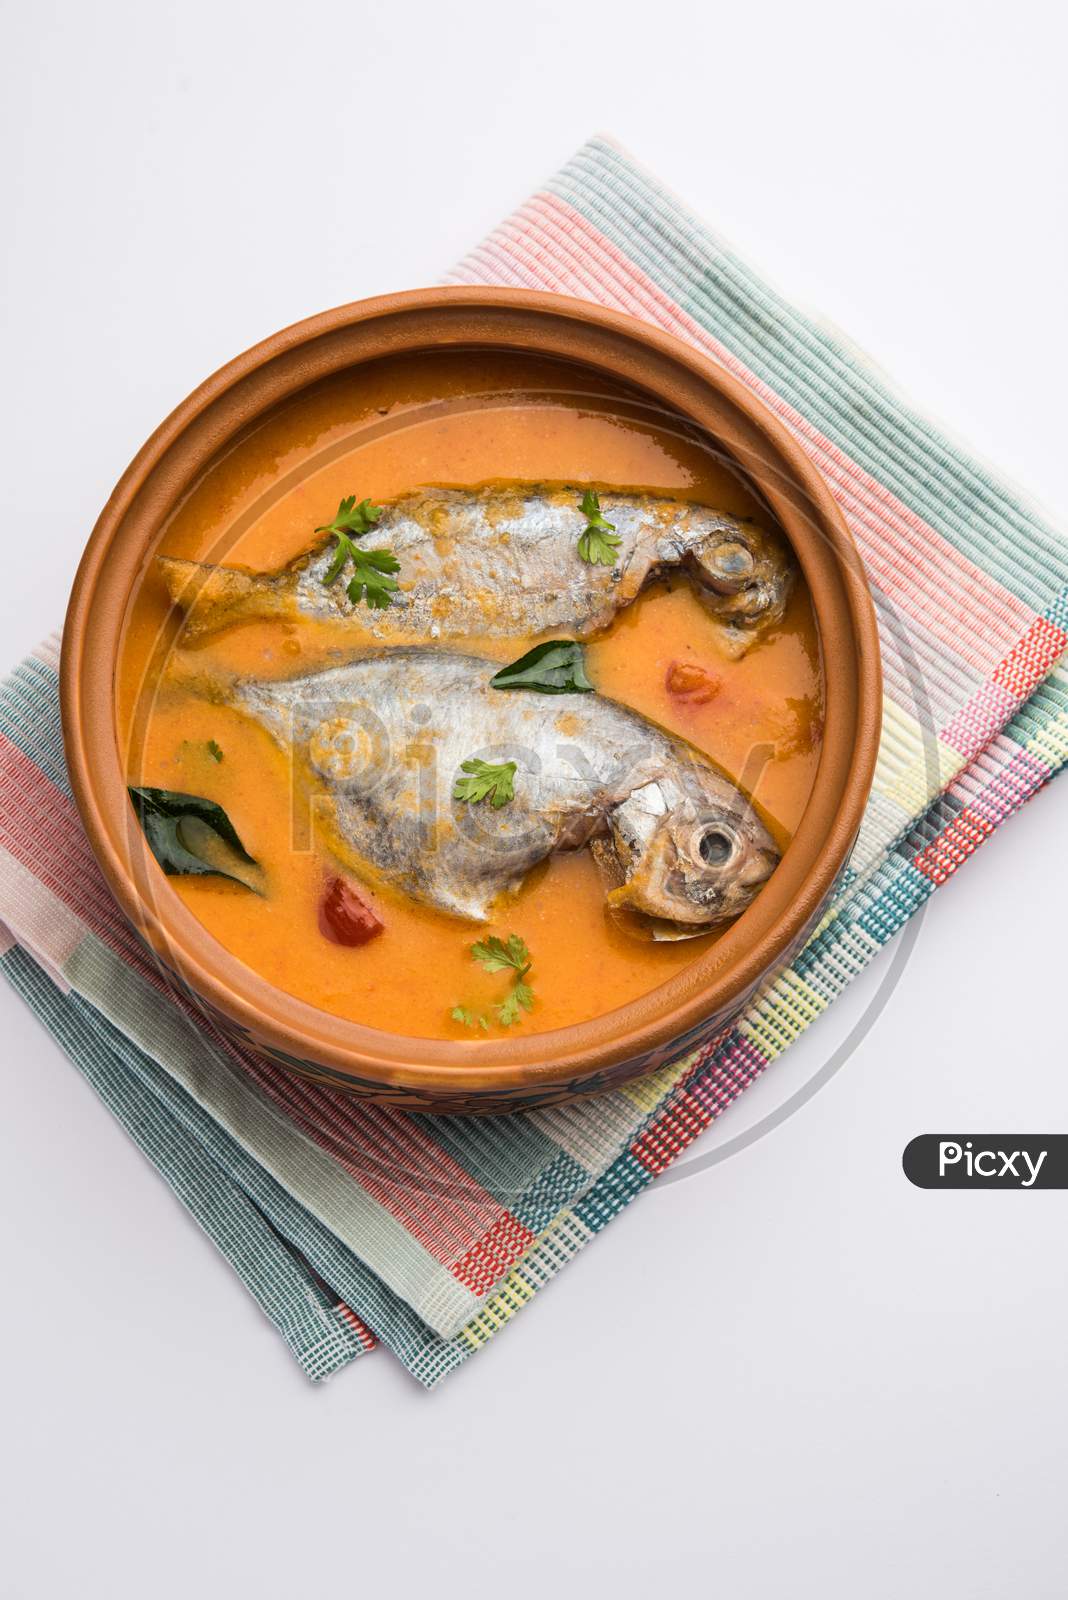 Spicy Fish Curry - Popular Indian Seafood Served With Rice